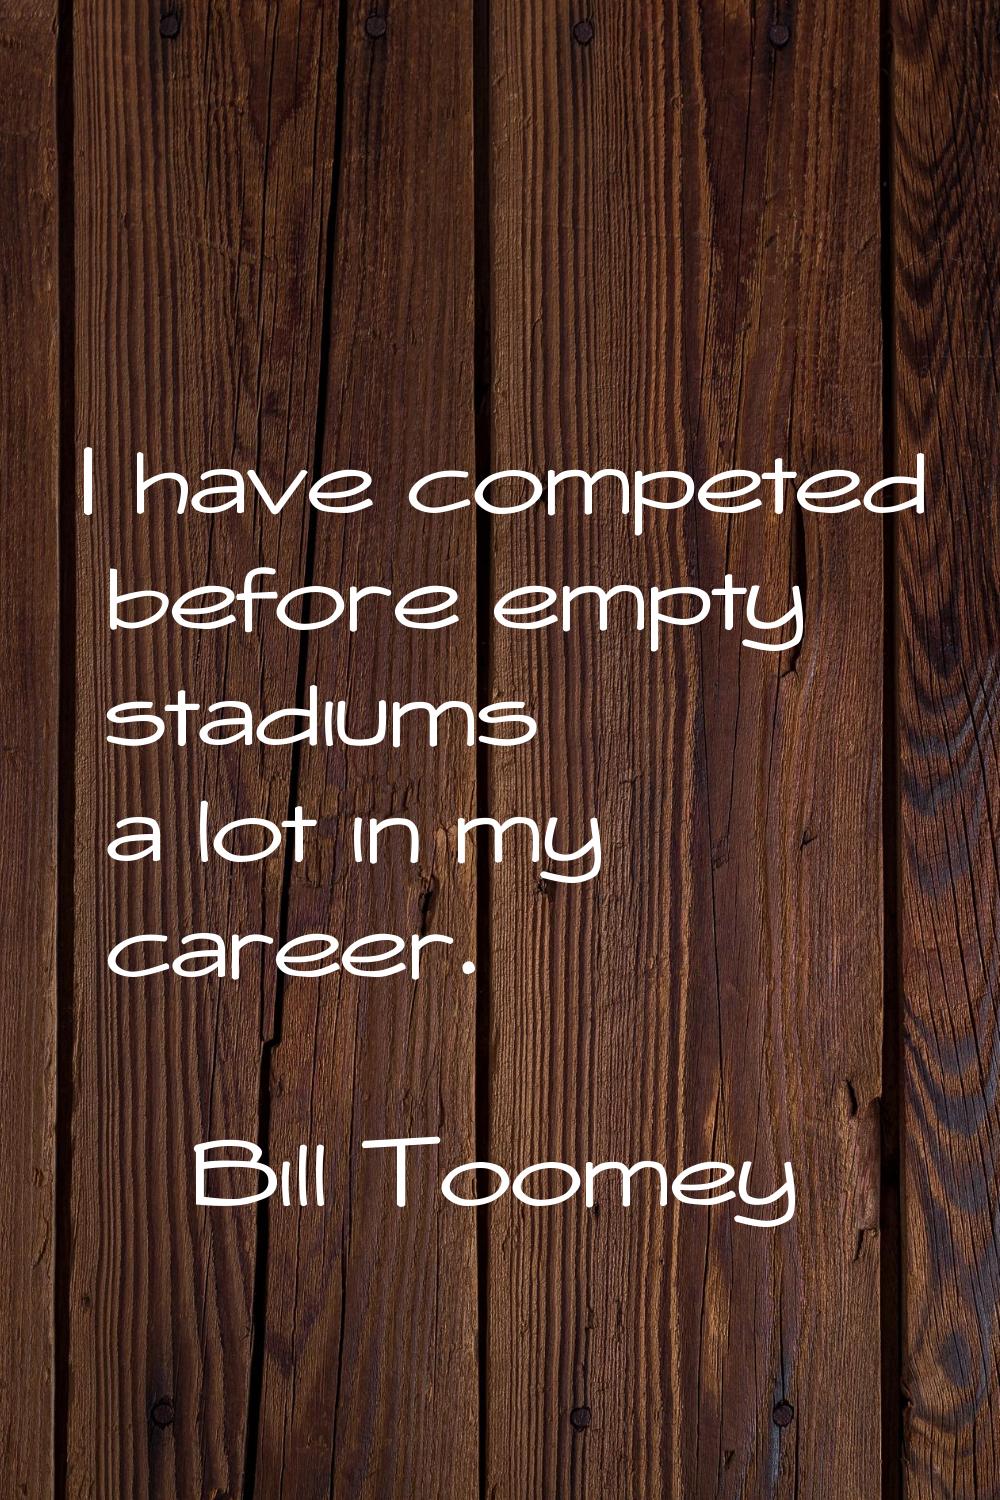 I have competed before empty stadiums a lot in my career.